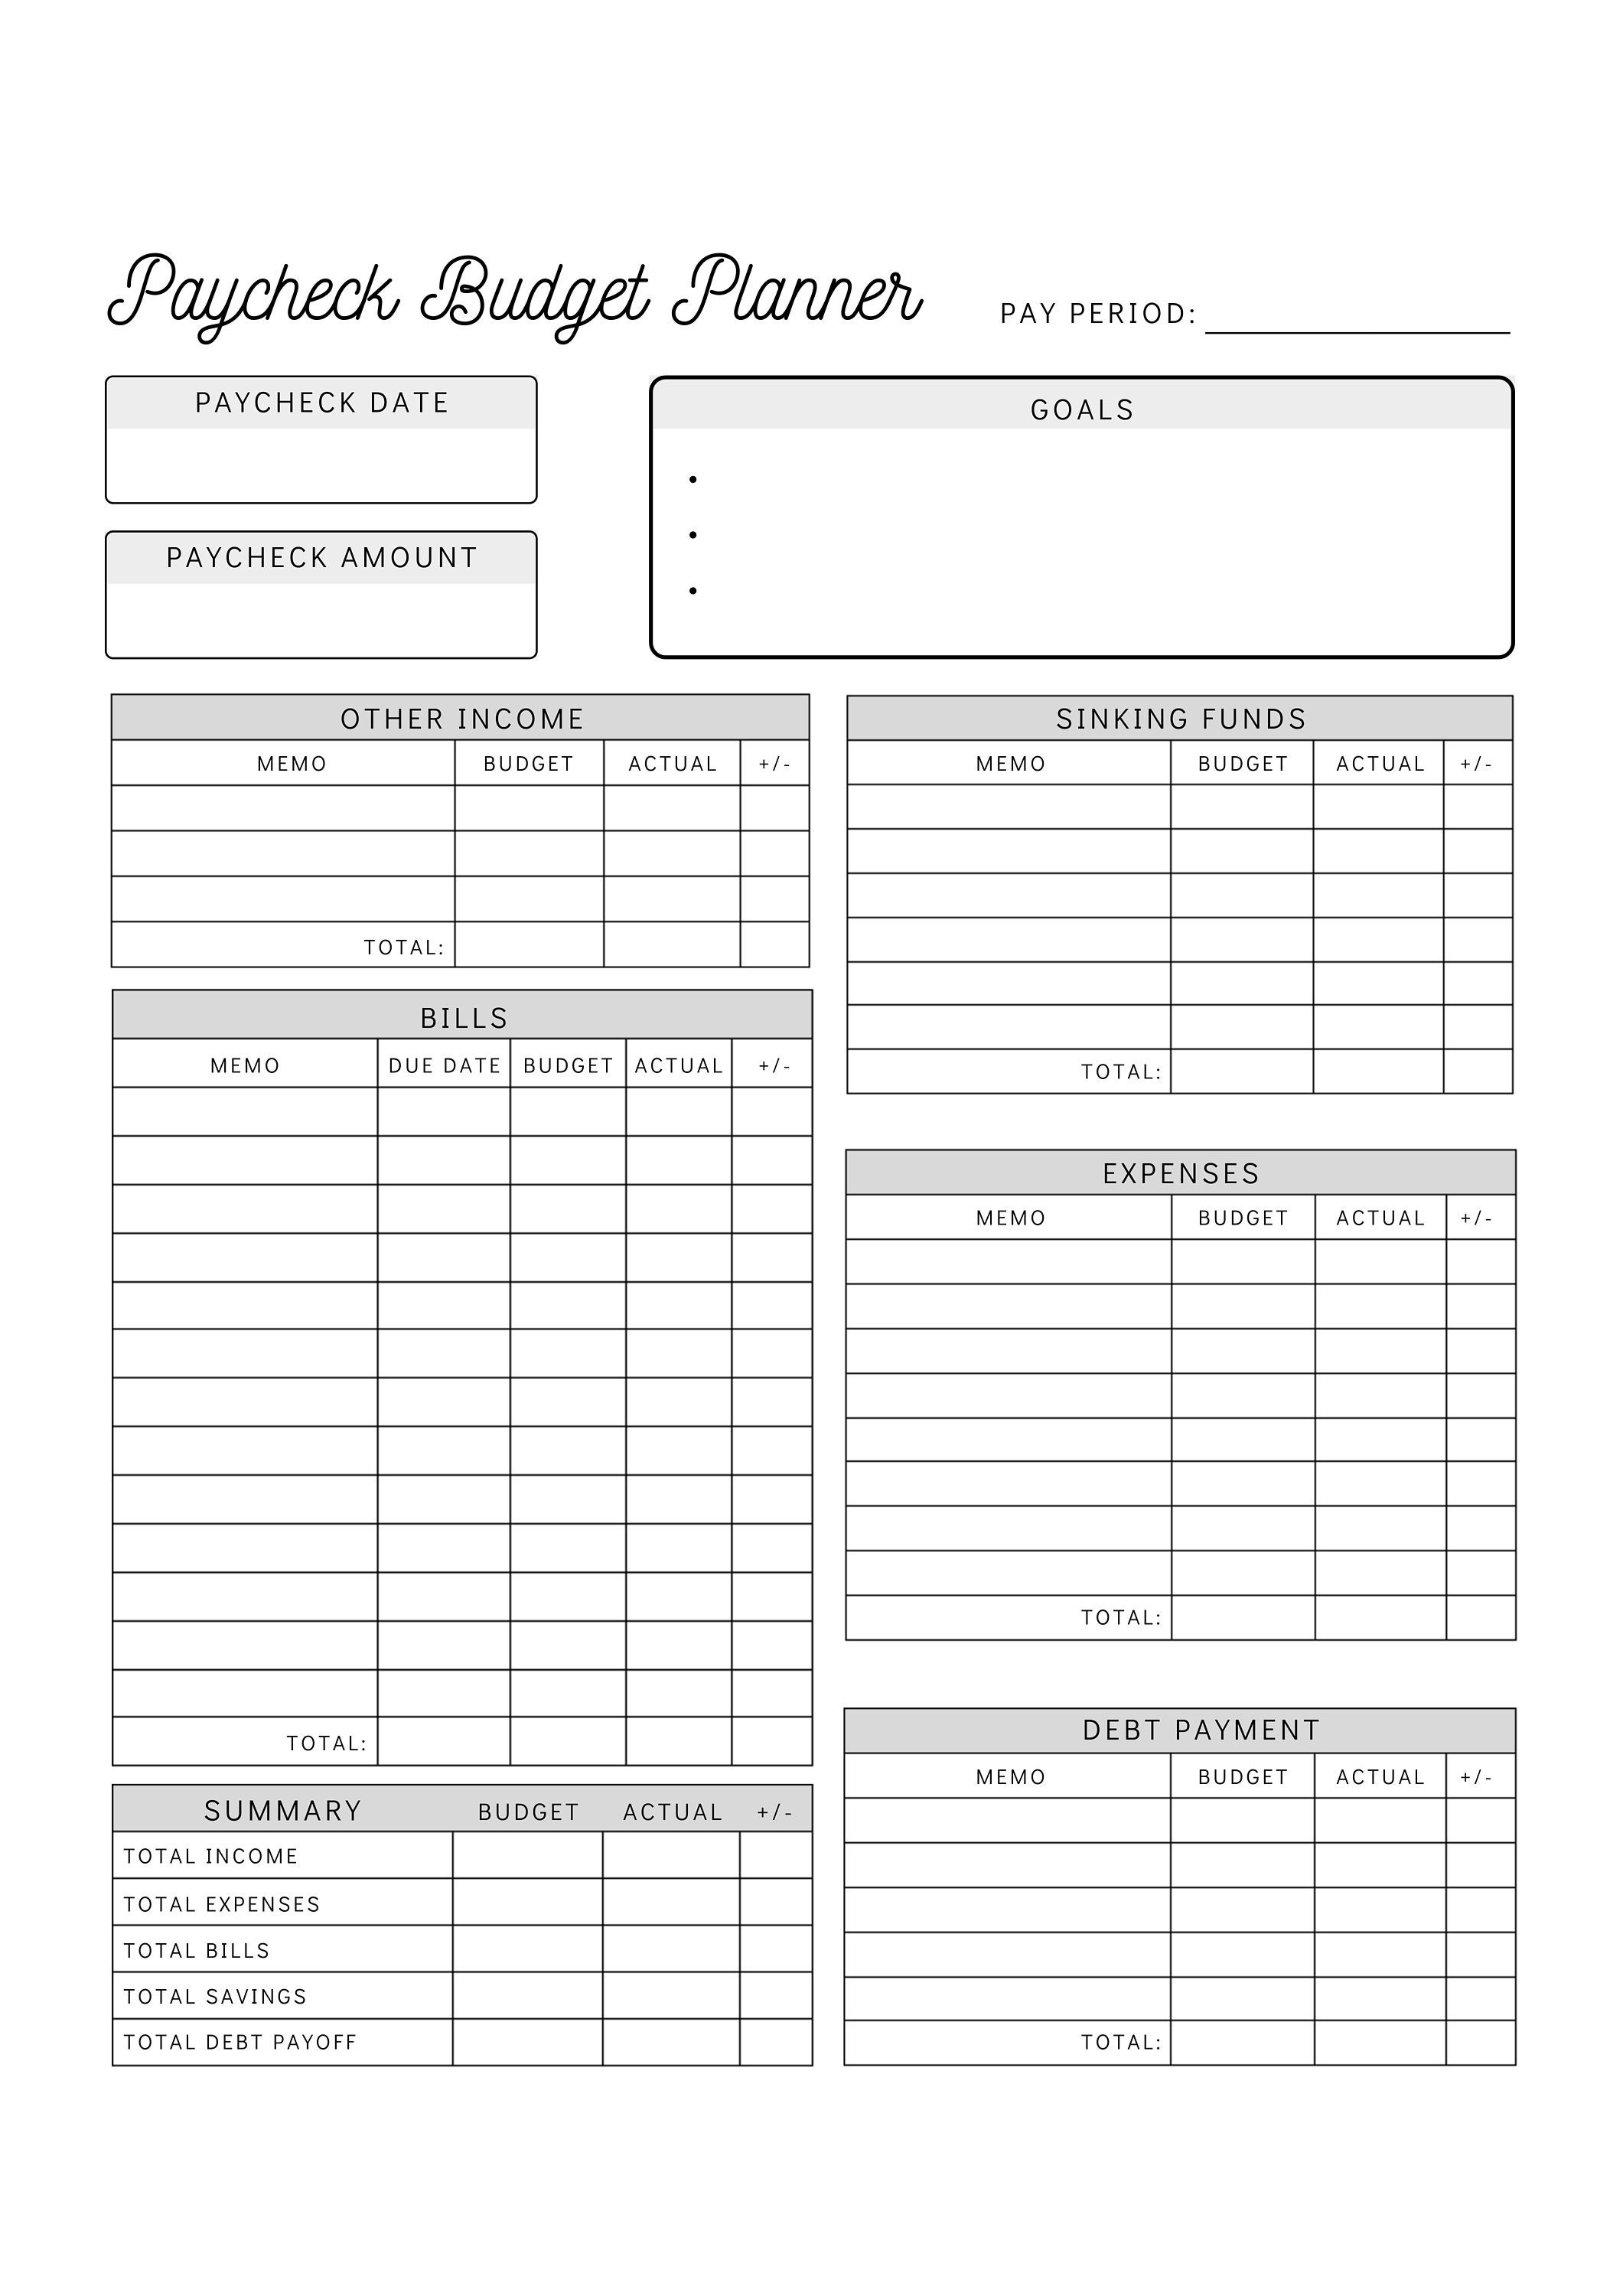 paycheck-budget-planner-printable-budget-by-paycheck-worksheet-biweekly